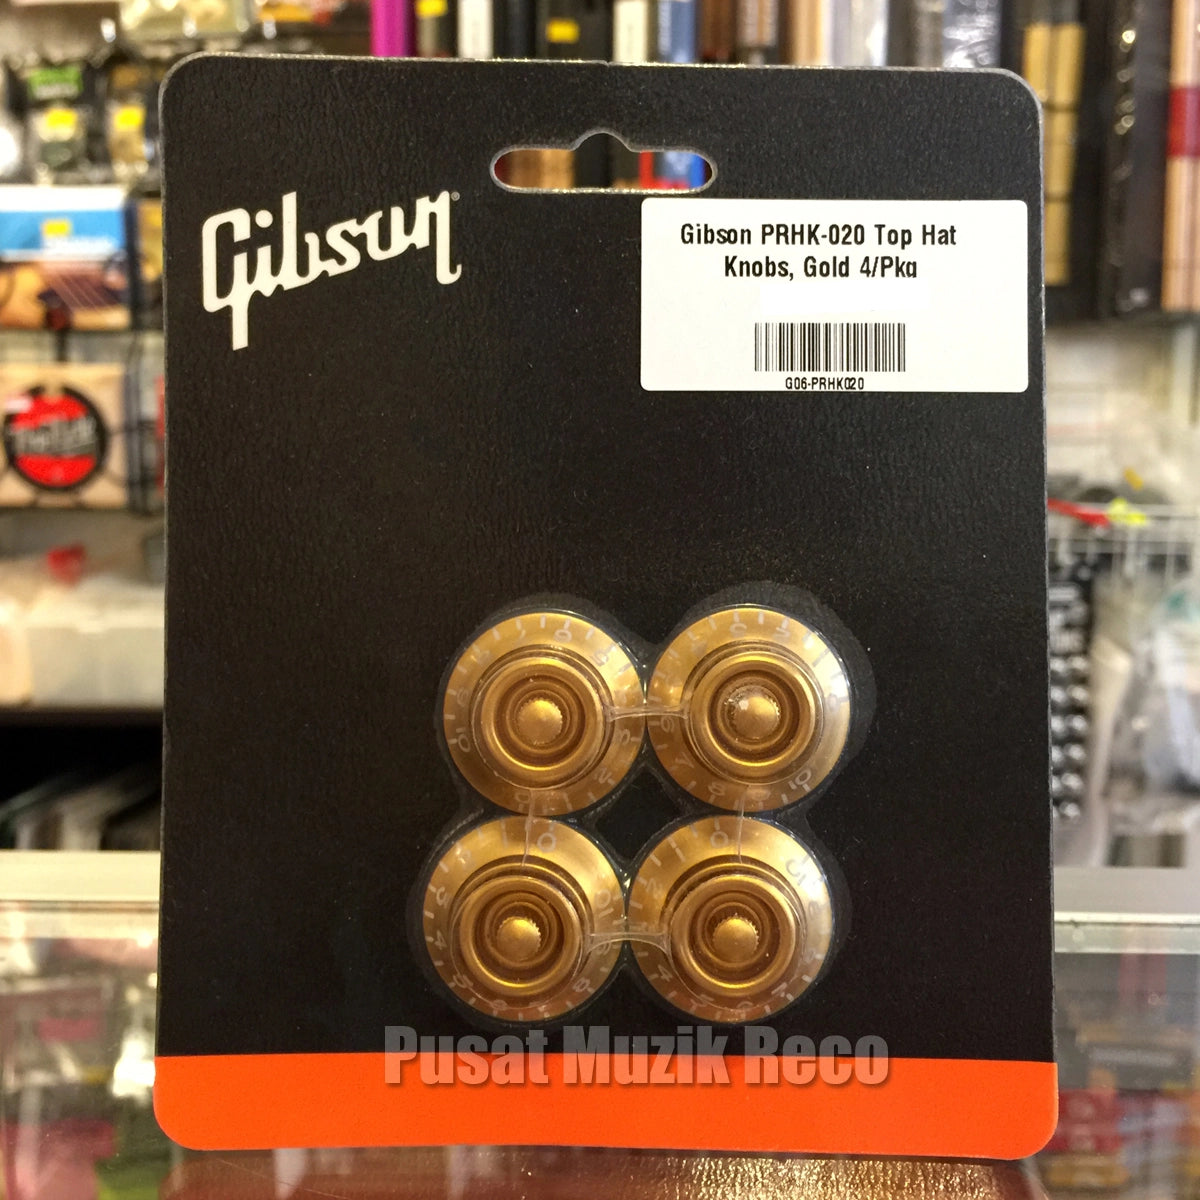 Gibson PRHK-020 Guitar Top Hat Knobs - 4 Pack, Gold - Reco Music Malaysia